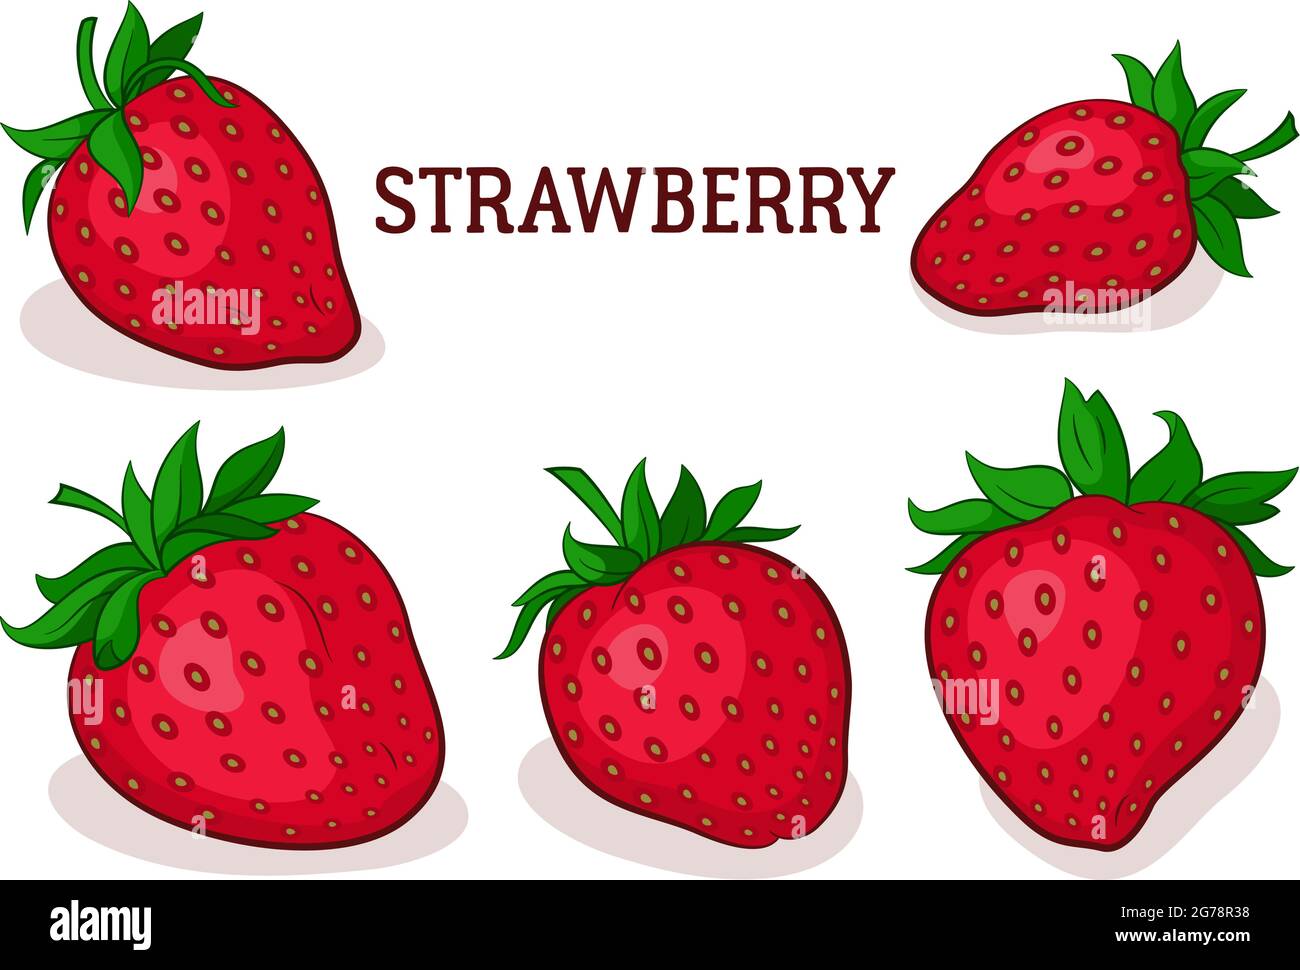 Pink strawberries Stock Vector Images - Alamy